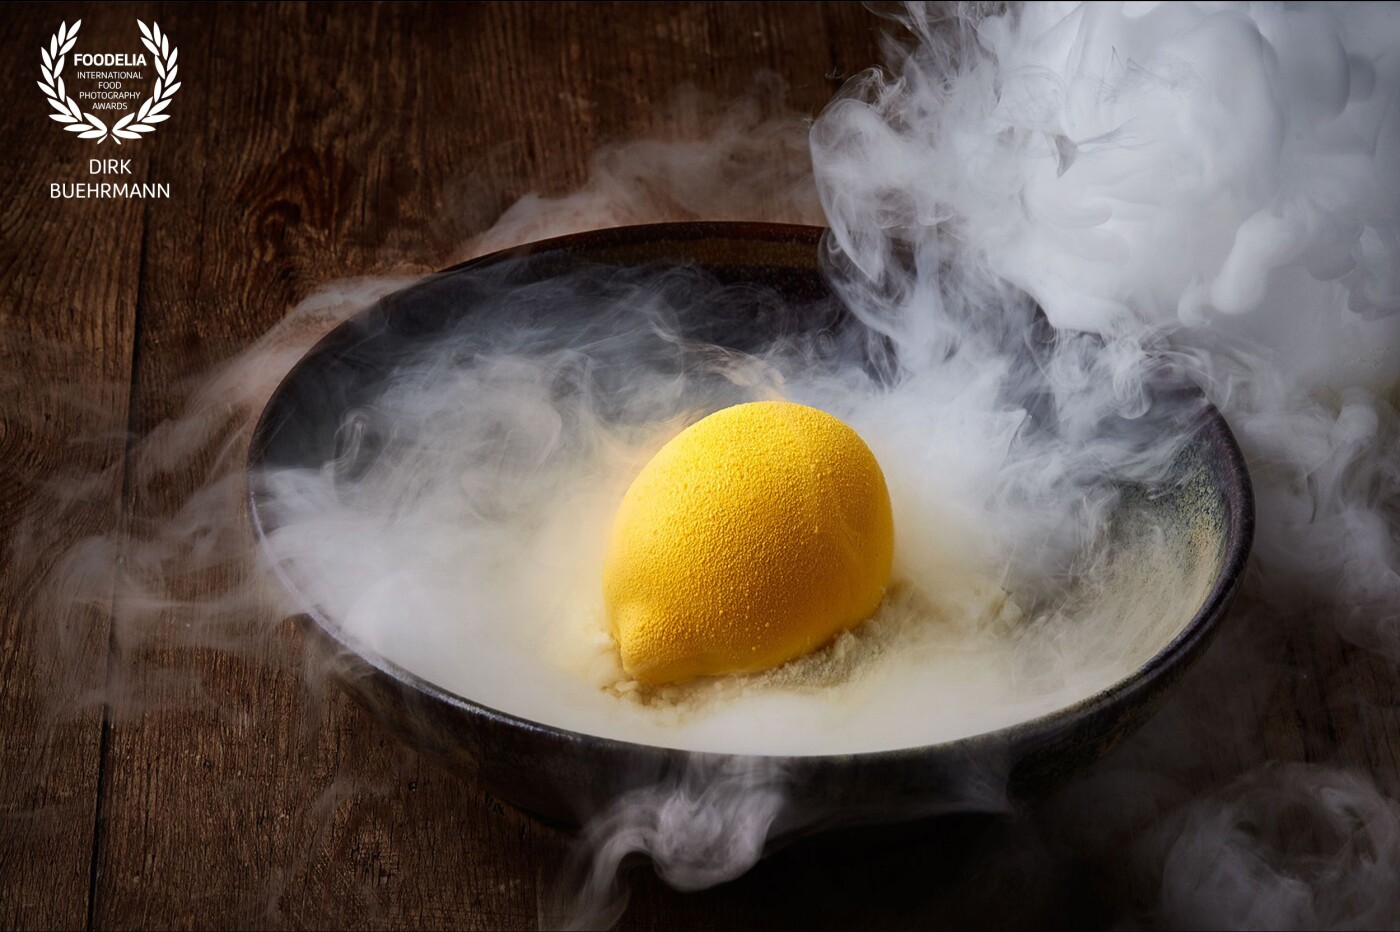 This desert is a creation of chef Bammer at Restaurant Strejf in Helsingør. It is based on lemon, panna cotta, white chocolate and dry ice with citrus flavour. A real sensation for all senses and just so fotogenic!